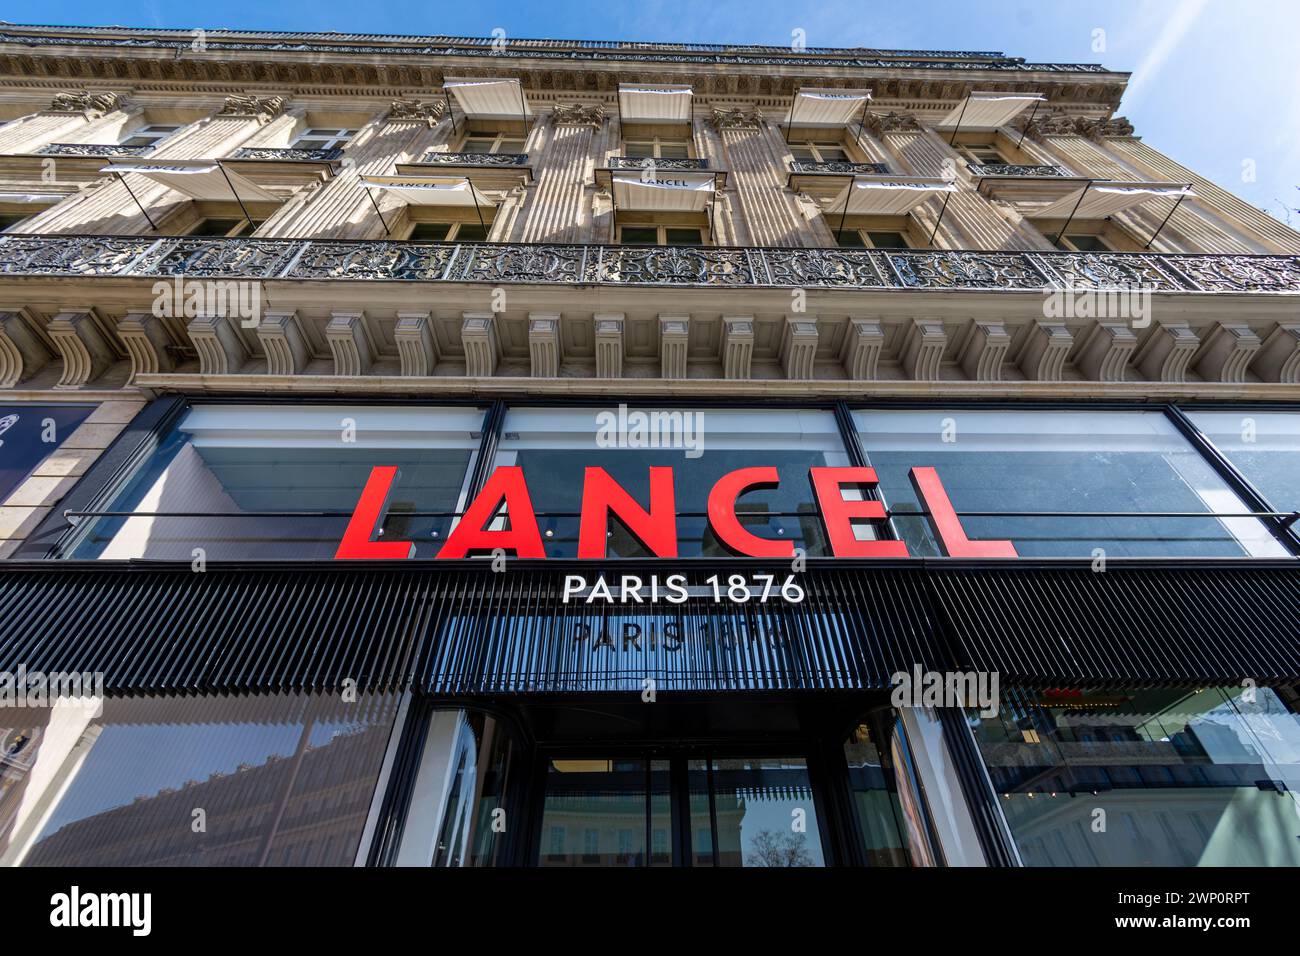 Facade of the main Lancel boutique located Place de l'Opéra in Paris. Lancel is a French leather goods company founded in Paris in 1876 Stock Photo